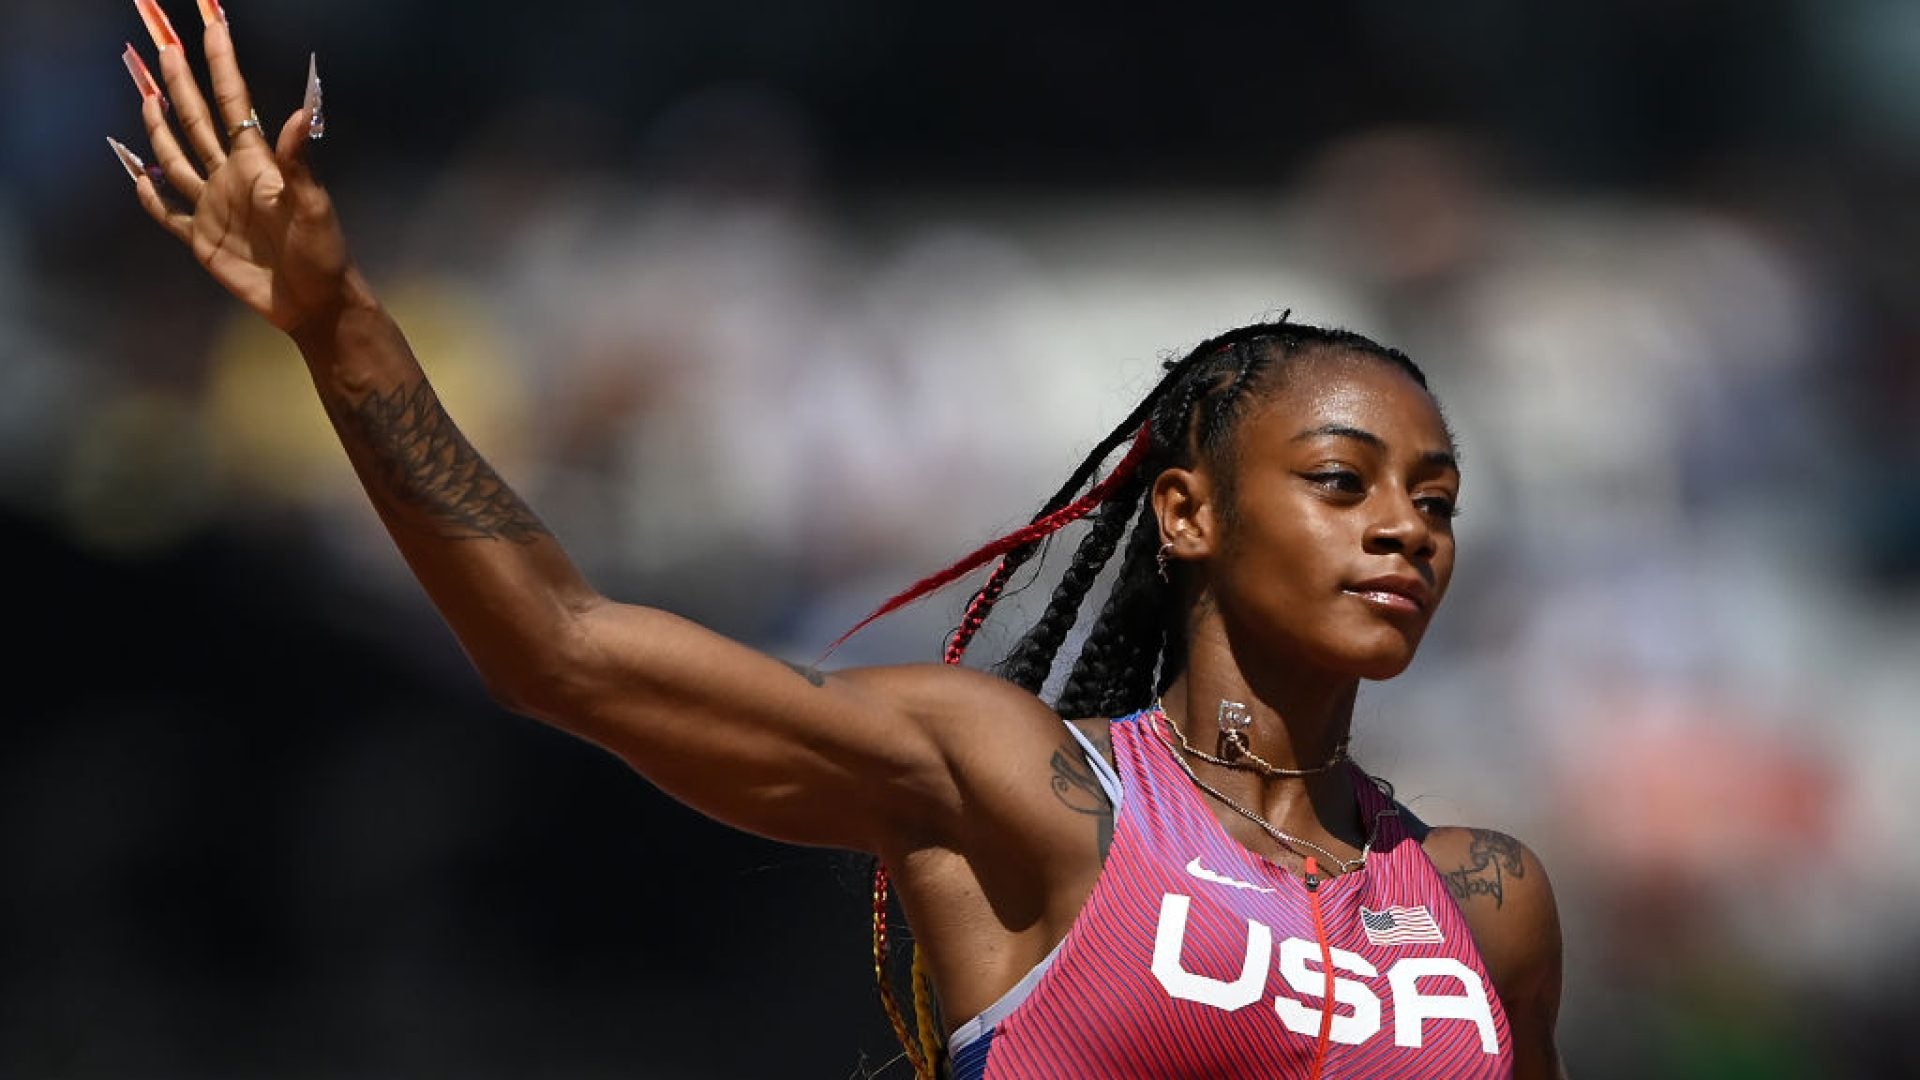 Sha'Carri Richardson Keeps On Winning And Is The New World Champion In 100 Meter Race